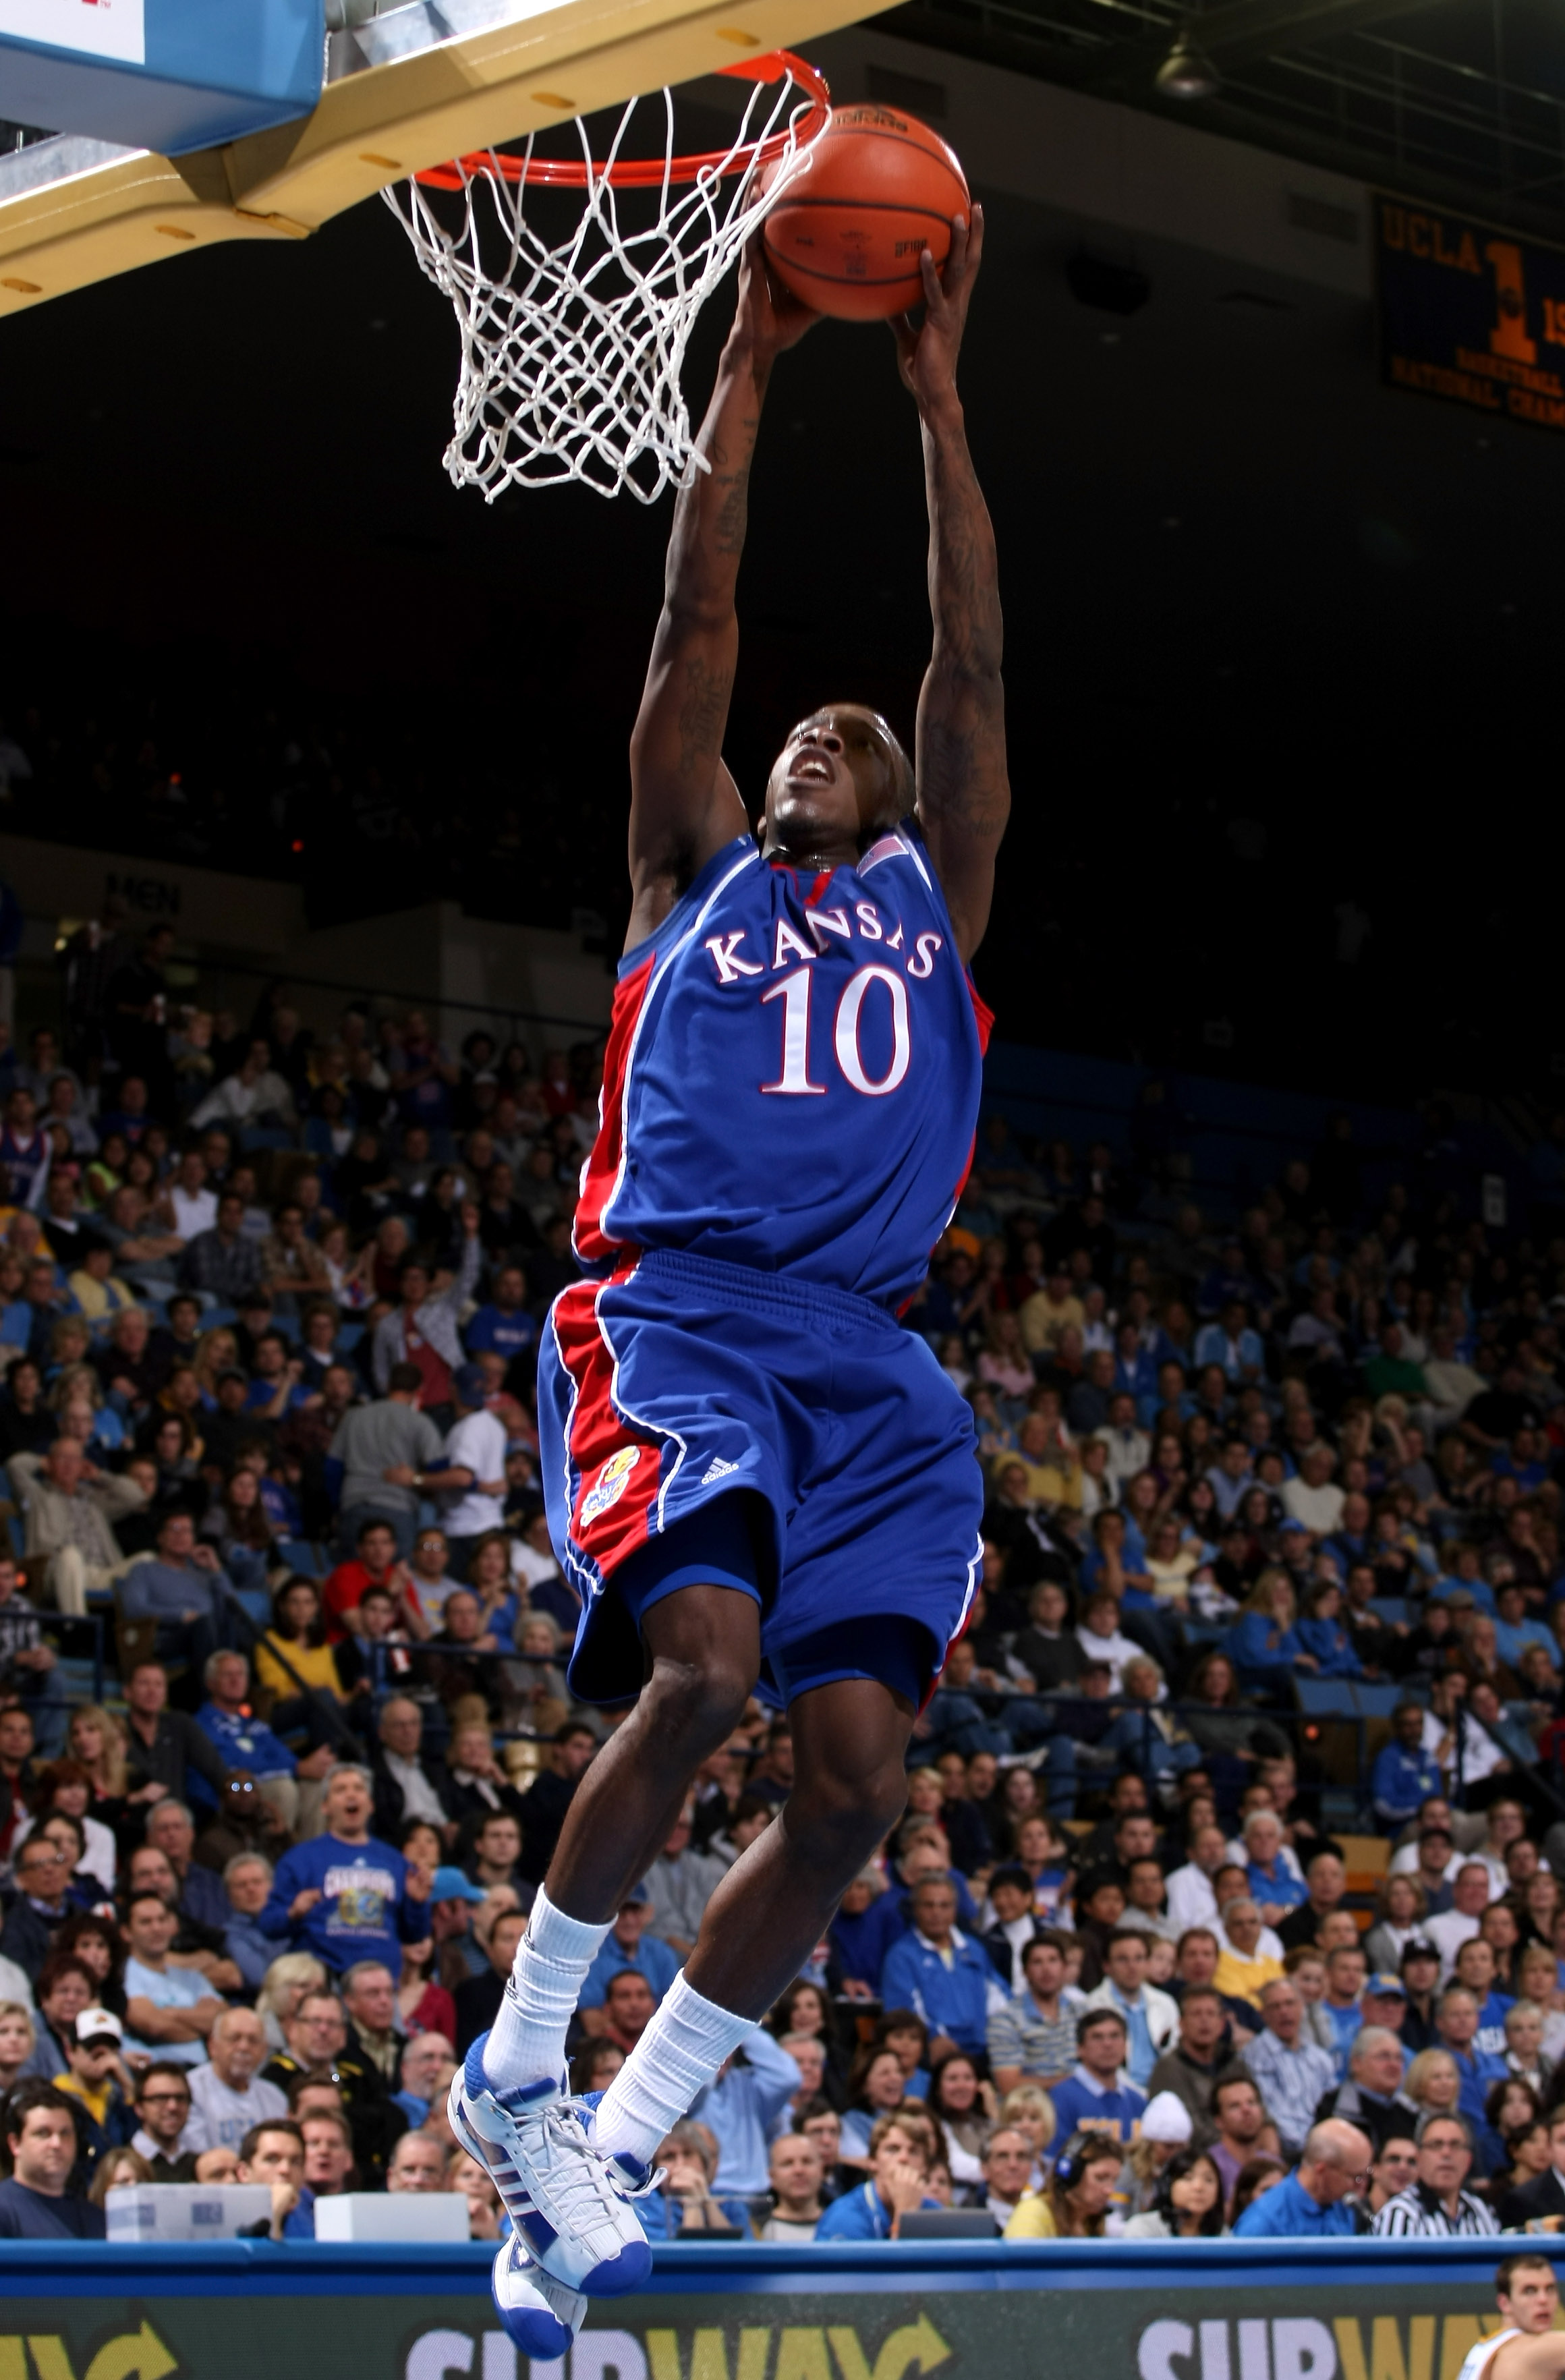 WESTWOOD, CA - DECEMBER 6:  Tyshawn Taylor #10 of the Kansas Jayhawks goes up to dunk against the UCLA Bruins on December 6, 2009 at Pauley Pavillion in Westwood, California.    (Photo by Stephen Dunn/Getty Images)